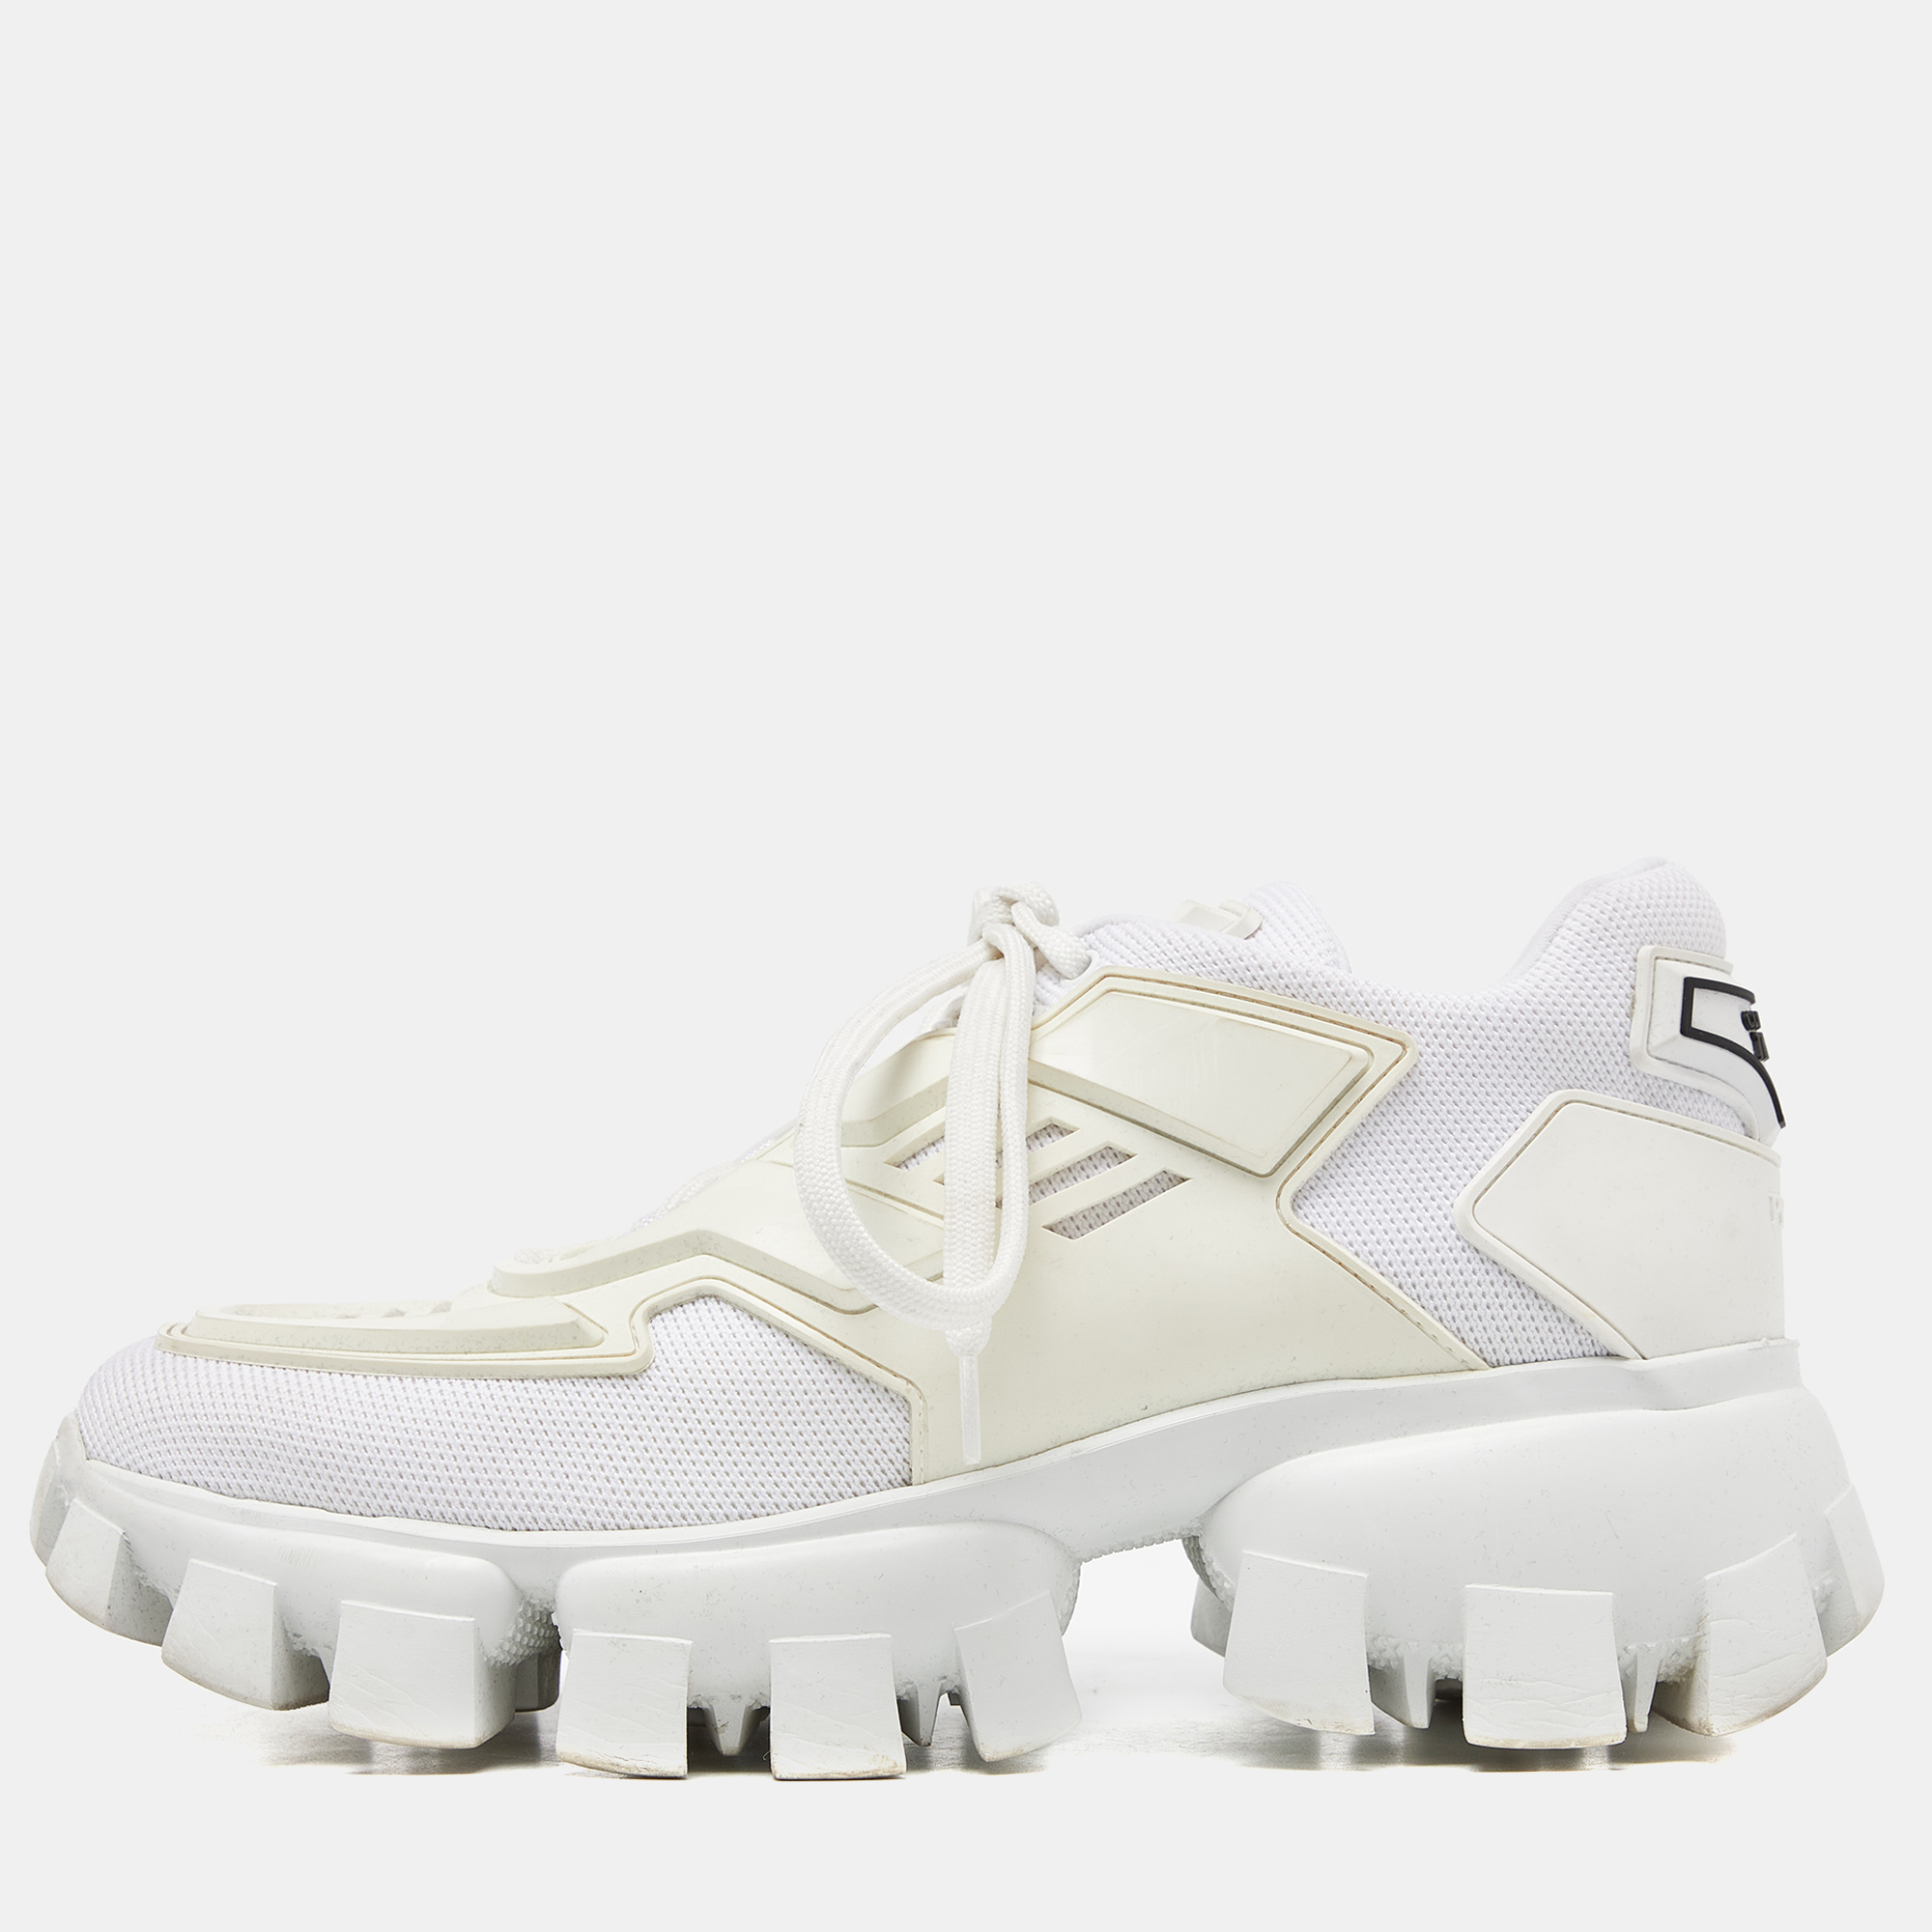 Prada white mesh and rubber cloudbust thunder low top sneakers size 36.5